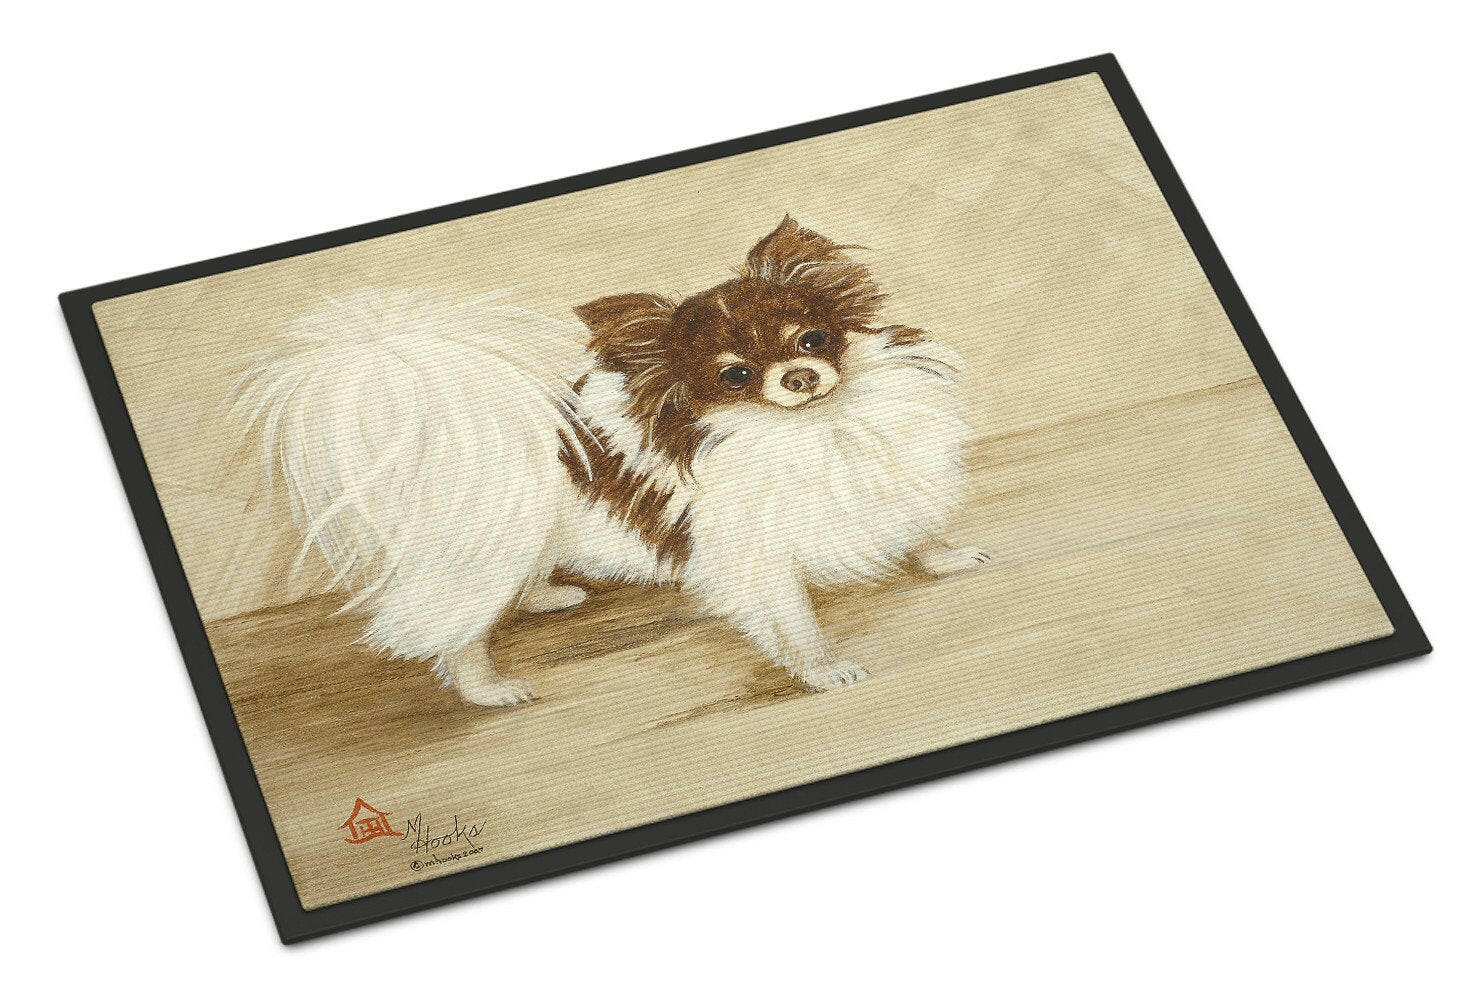 Chihuahua Favorite Flavors Indoor or Outdoor Mat 18x27 MH1051MAT - the-store.com